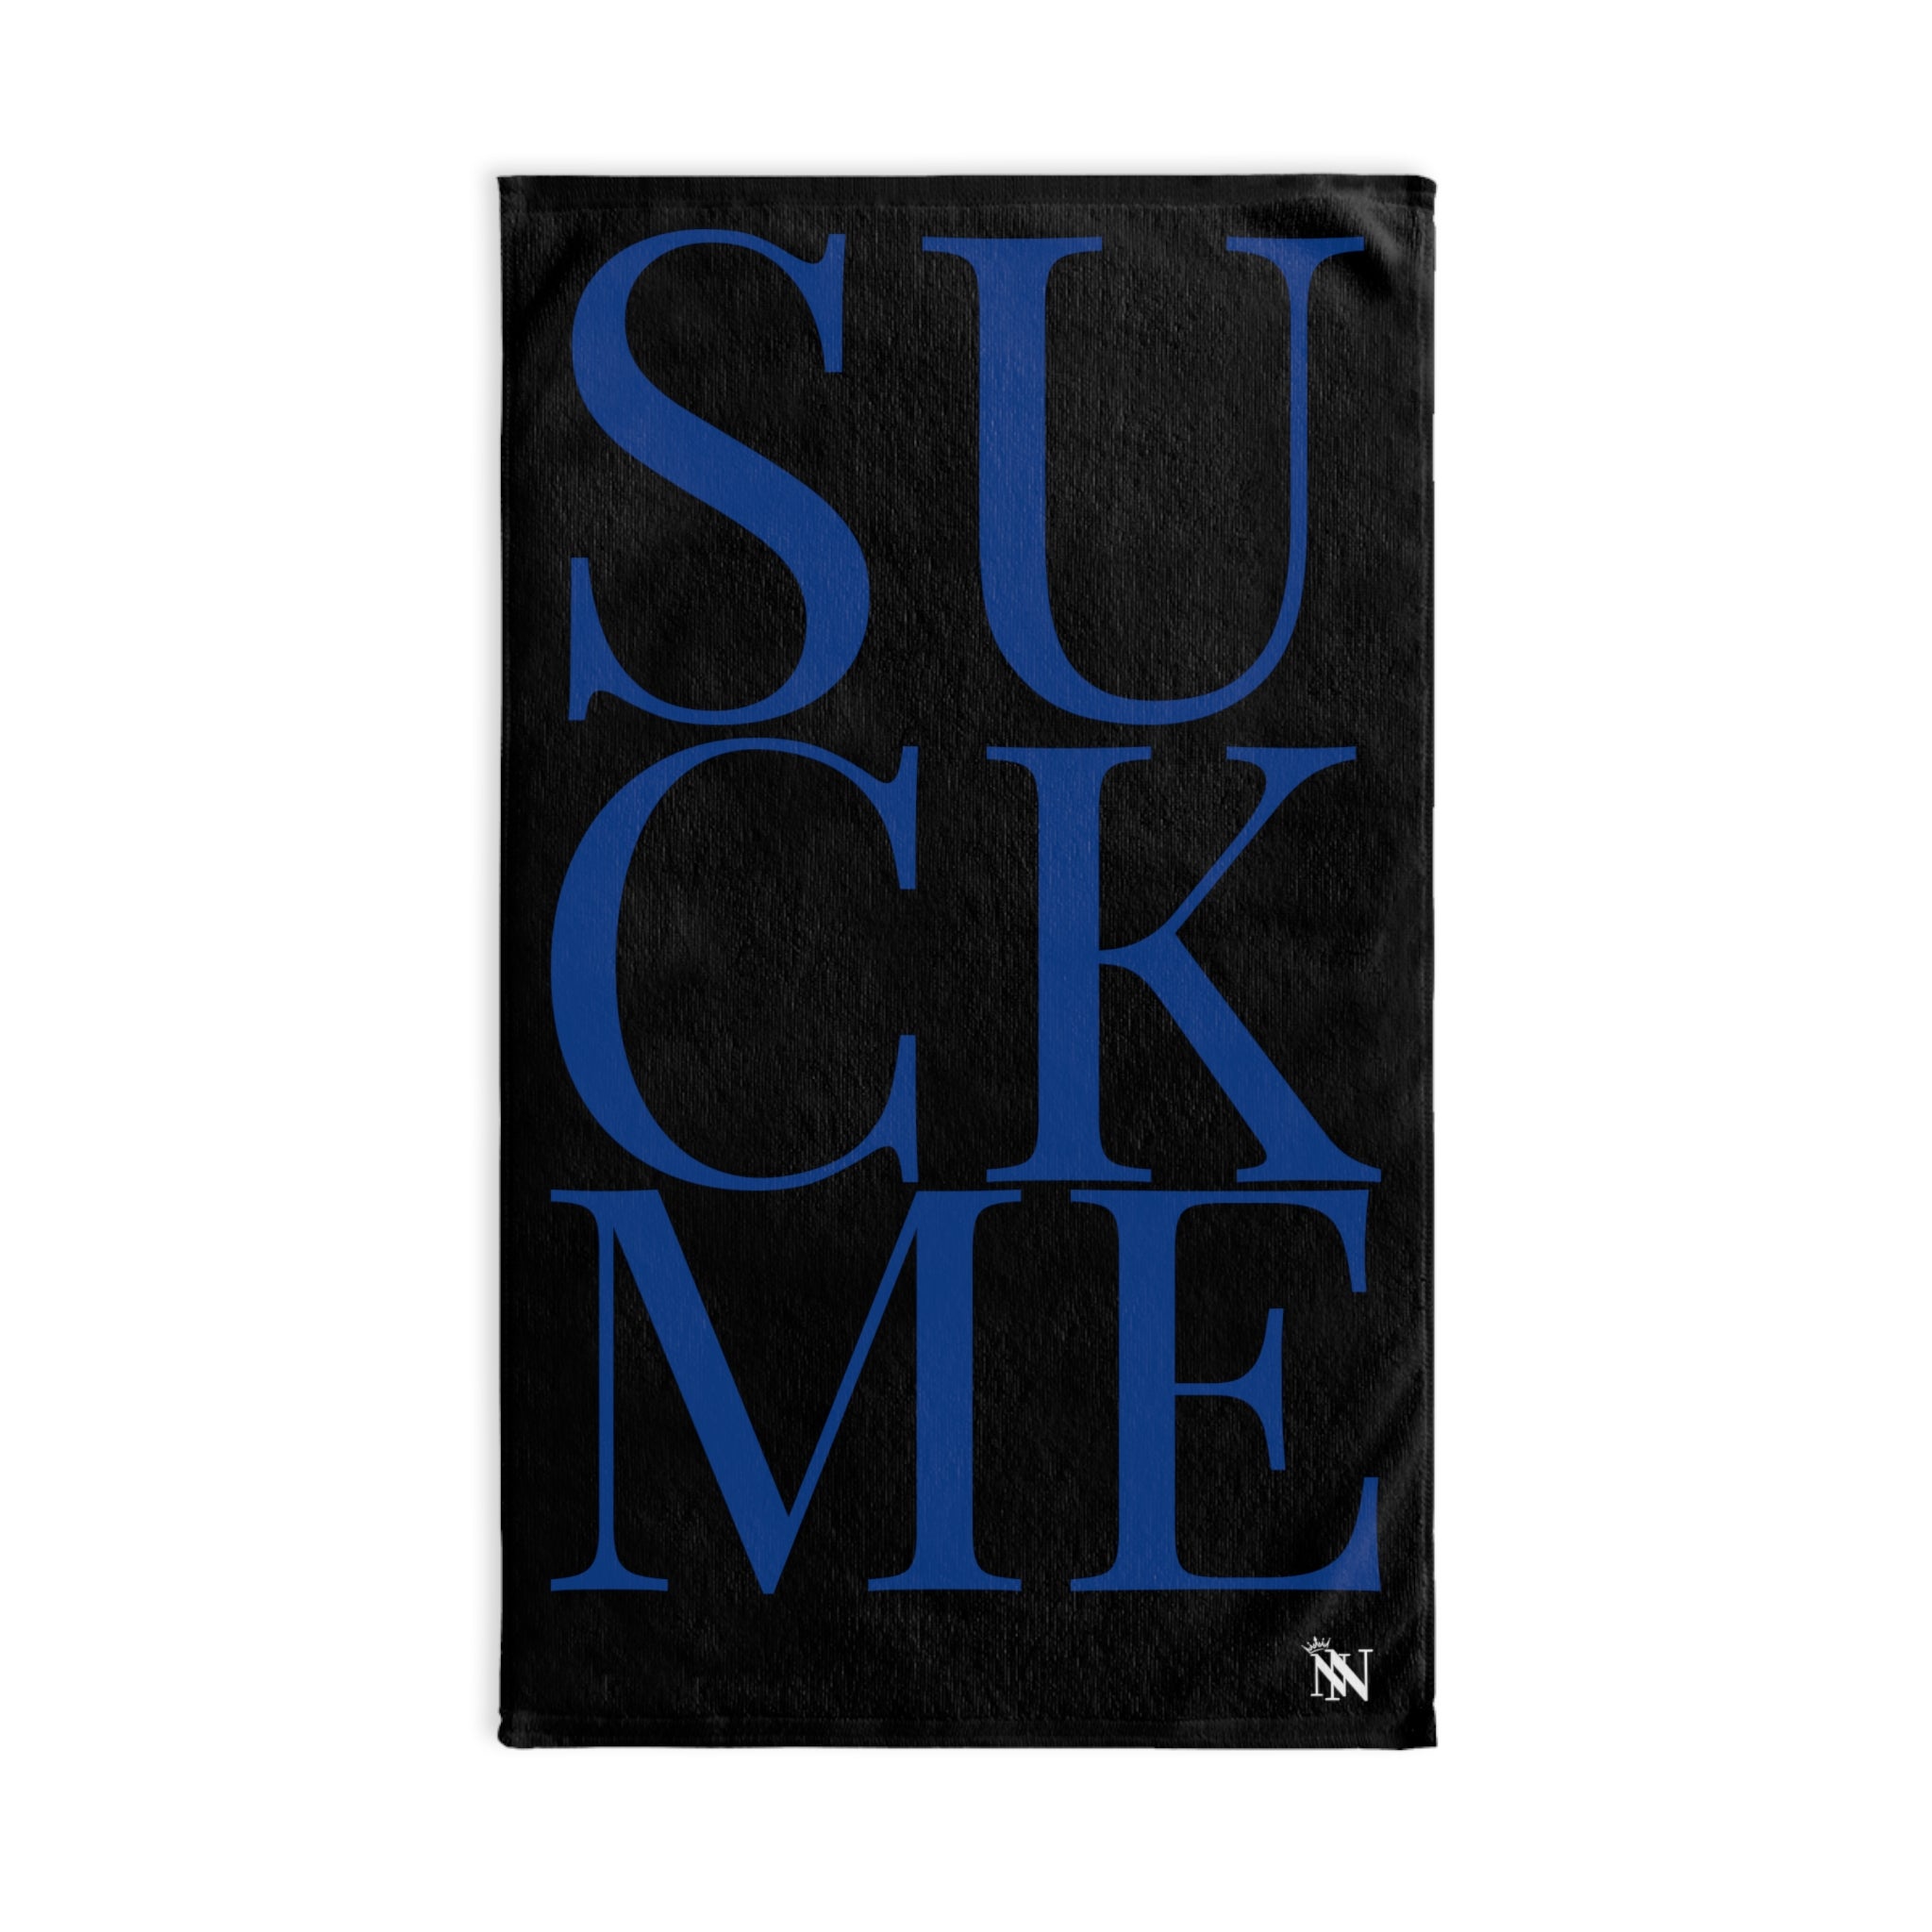 Suck Me Blue Black | Sexy Gifts for Boyfriend, Funny Towel Romantic Gift for Wedding Couple Fiance First Year 2nd Anniversary Valentines, Party Gag Gifts, Joke Humor Cloth for Husband Men BF NECTAR NAPKINS